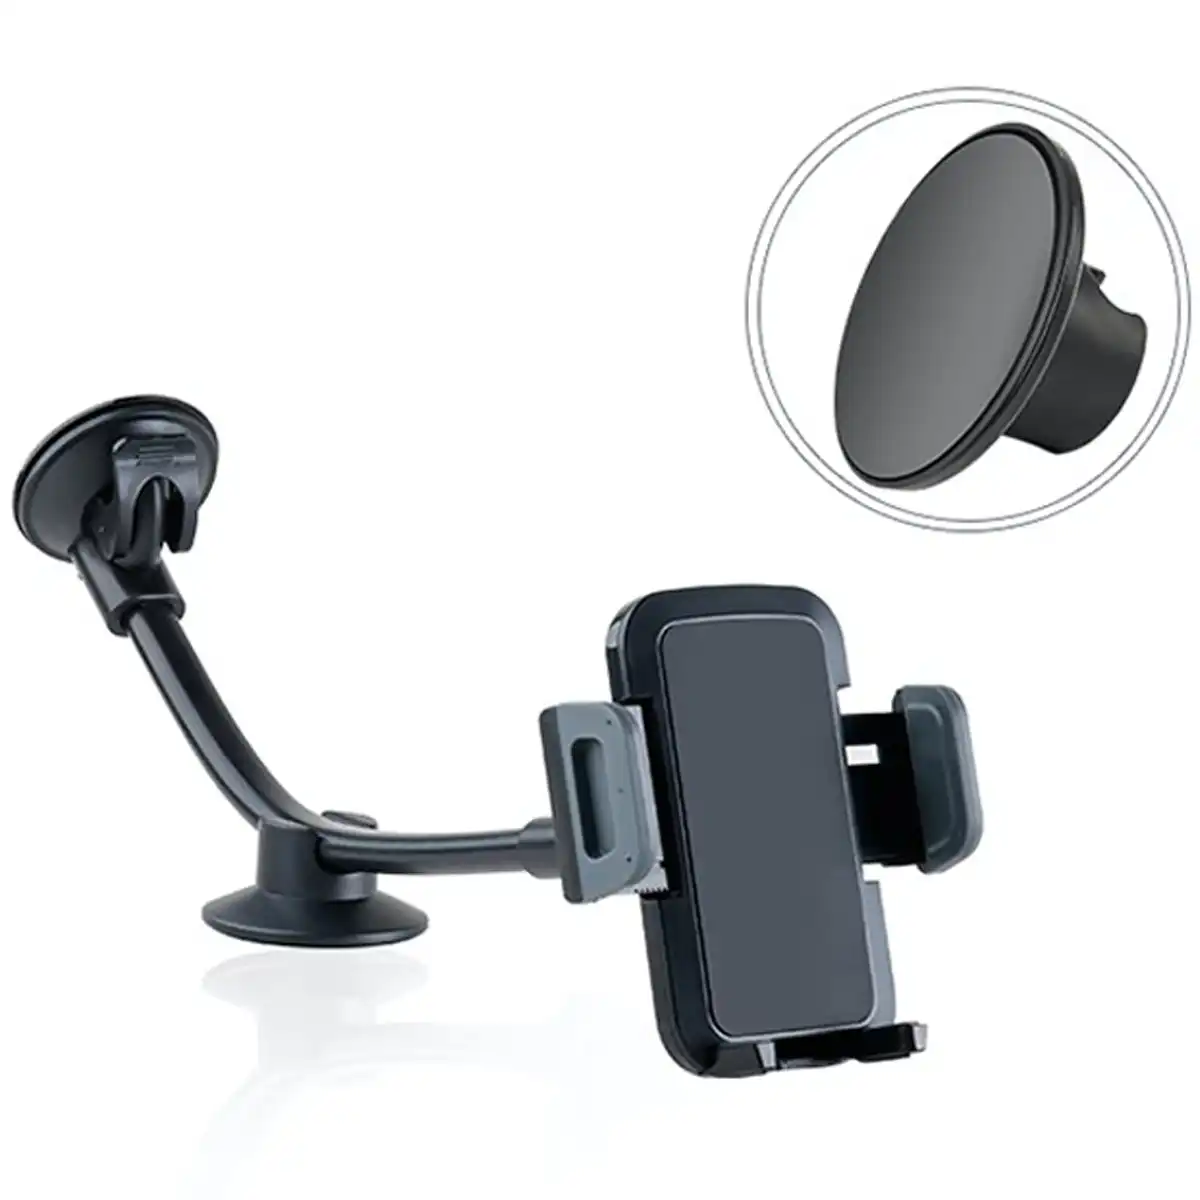 Quick Snap Universal Car Windshield Mount Holder Stand Mobile 3.5" - 7" Mobile Phone